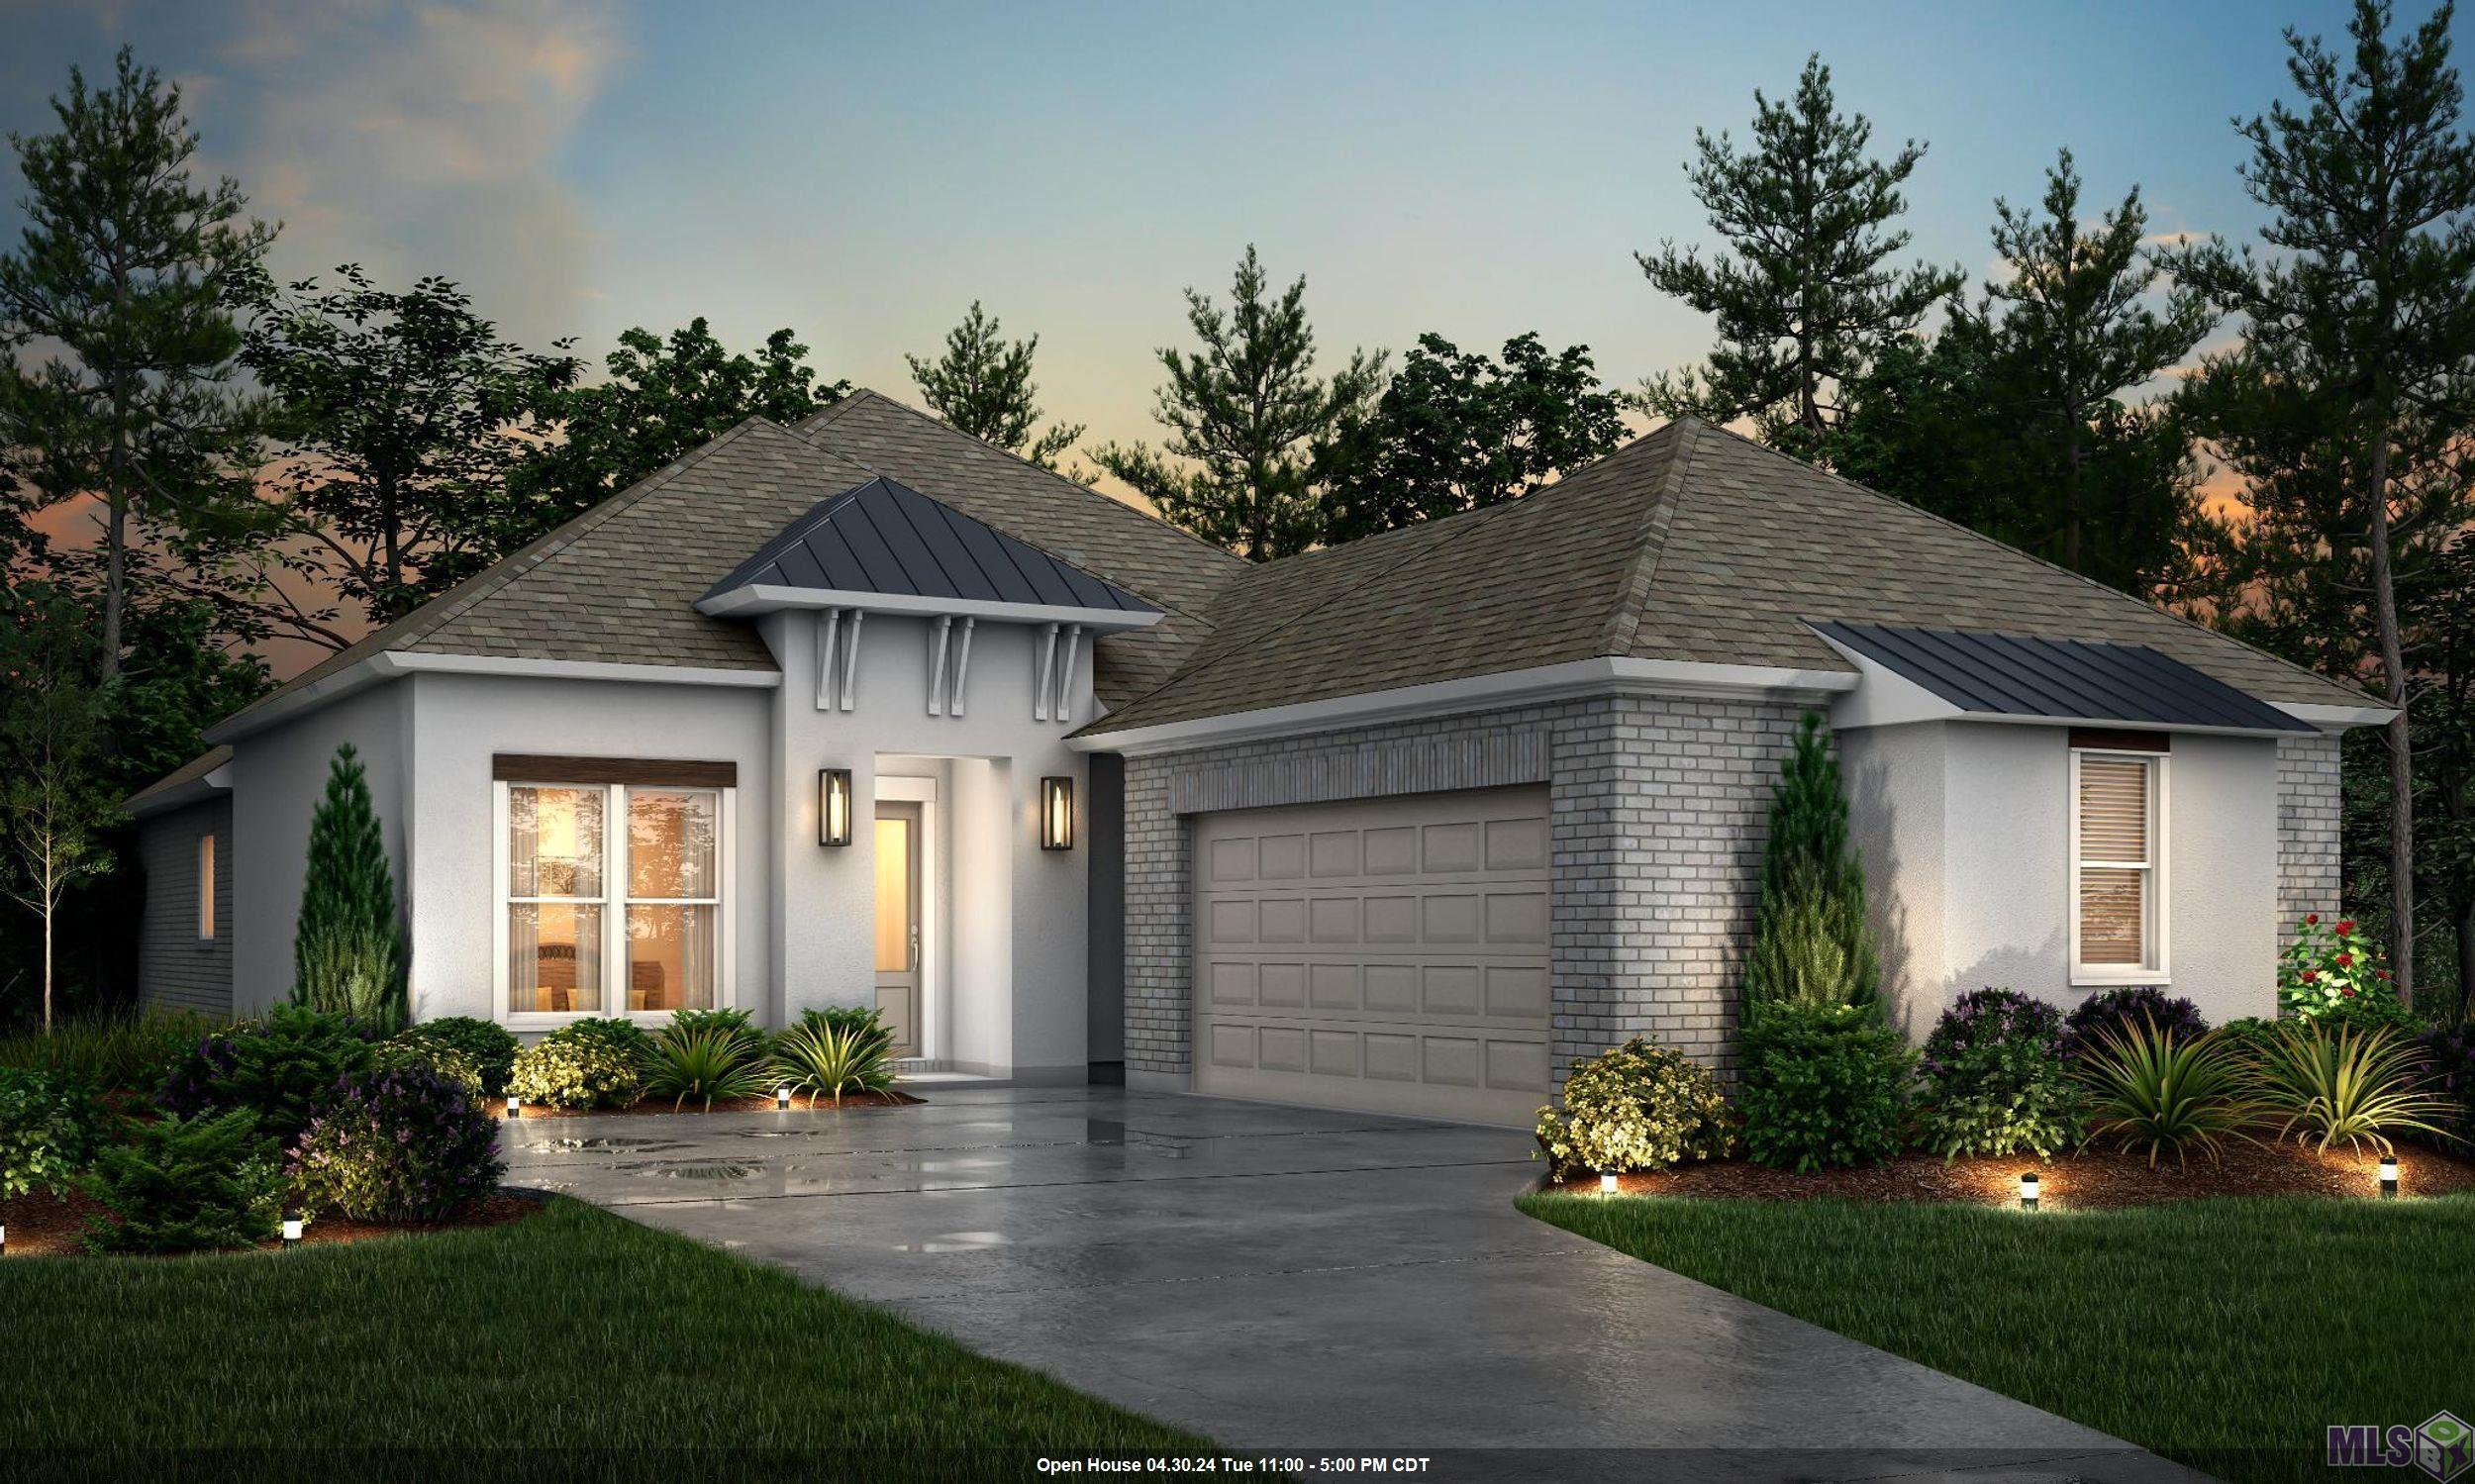 Estimated completion: 12/30/2023  Alvarez Construction is bringing luxury living to Livingston Parish with 71 homesites offering 29 style options. All homes will range from 3-5 bedrooms, 2-3 bathrooms and will start at 1,555 sq ft. Juban Gardens also boasts two ponds and a green space, adding to the unique character of the community. Located off I-12 and near Juban Crossing Shopping Center, you are never far from all the shopping, dining, and entertainment you could ever need. Through the main living areas you'll find vinyl-plank floors, while the bathrooms and utility room feature tile flooring. The living areas and Owner's suite feature crown molding, and the kitchen boasts custom cabinetry, an oversized island, a gas cooktop, and 3cm granite countertops. Smart devices such as a Wi-Fi-enabled SmartHome hub, wireless security system, exterior security camera, Wi-Fi-enabled garage door, wireless smoke/heat combination detector, and a WiFi-enabled thermostat come included with your home - and for added peace of mind.  The Hemlock plan is a 4bed/3bath single story home offering open and spacious living areas with 12' high ceilings. Adjacent living and dining areas with wall of windows to back yard. LVT floors and oversized ceramic throughout with carpet in the bedrooms. Gourmet kitchen features keeping area, chef's island, GE stainless steel smart appliances, gas cooktop, separate wall oven and walk-in pantry. Private Master bedroom has en-suite bathroom with dual vanities, walk-in shower, garden tub, WC, and walk-in closet.    Included upgrades: Premium lake lot, electrical floor outlet in the living room, 3cm granite level 3 countertops, tile place tile level 4, custom tile shower in the owner's bathroom, tile level 2 in all wet areas, vinyl flooring in all common areas and owner's bedroom, kitchen wall cabinets to ceiling, kitchen trash can pull out drawer with 2 bins, cabinet hardware upgrade level 1 & wood framed mirrors in all bath